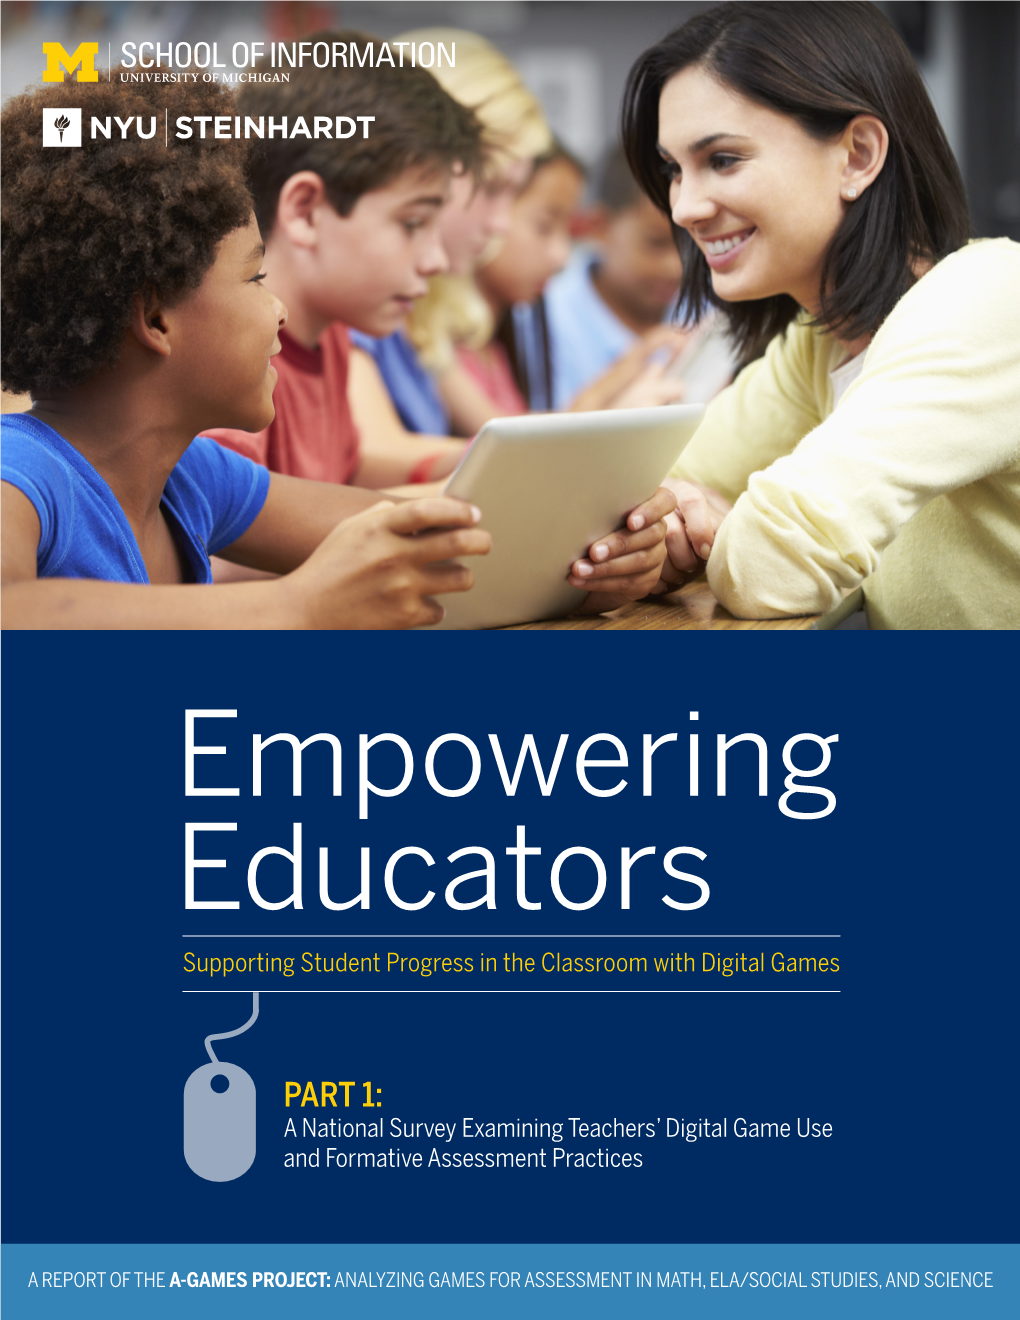 Empowering Educators: Supporting Student Progress in the Classroom with Digital Games